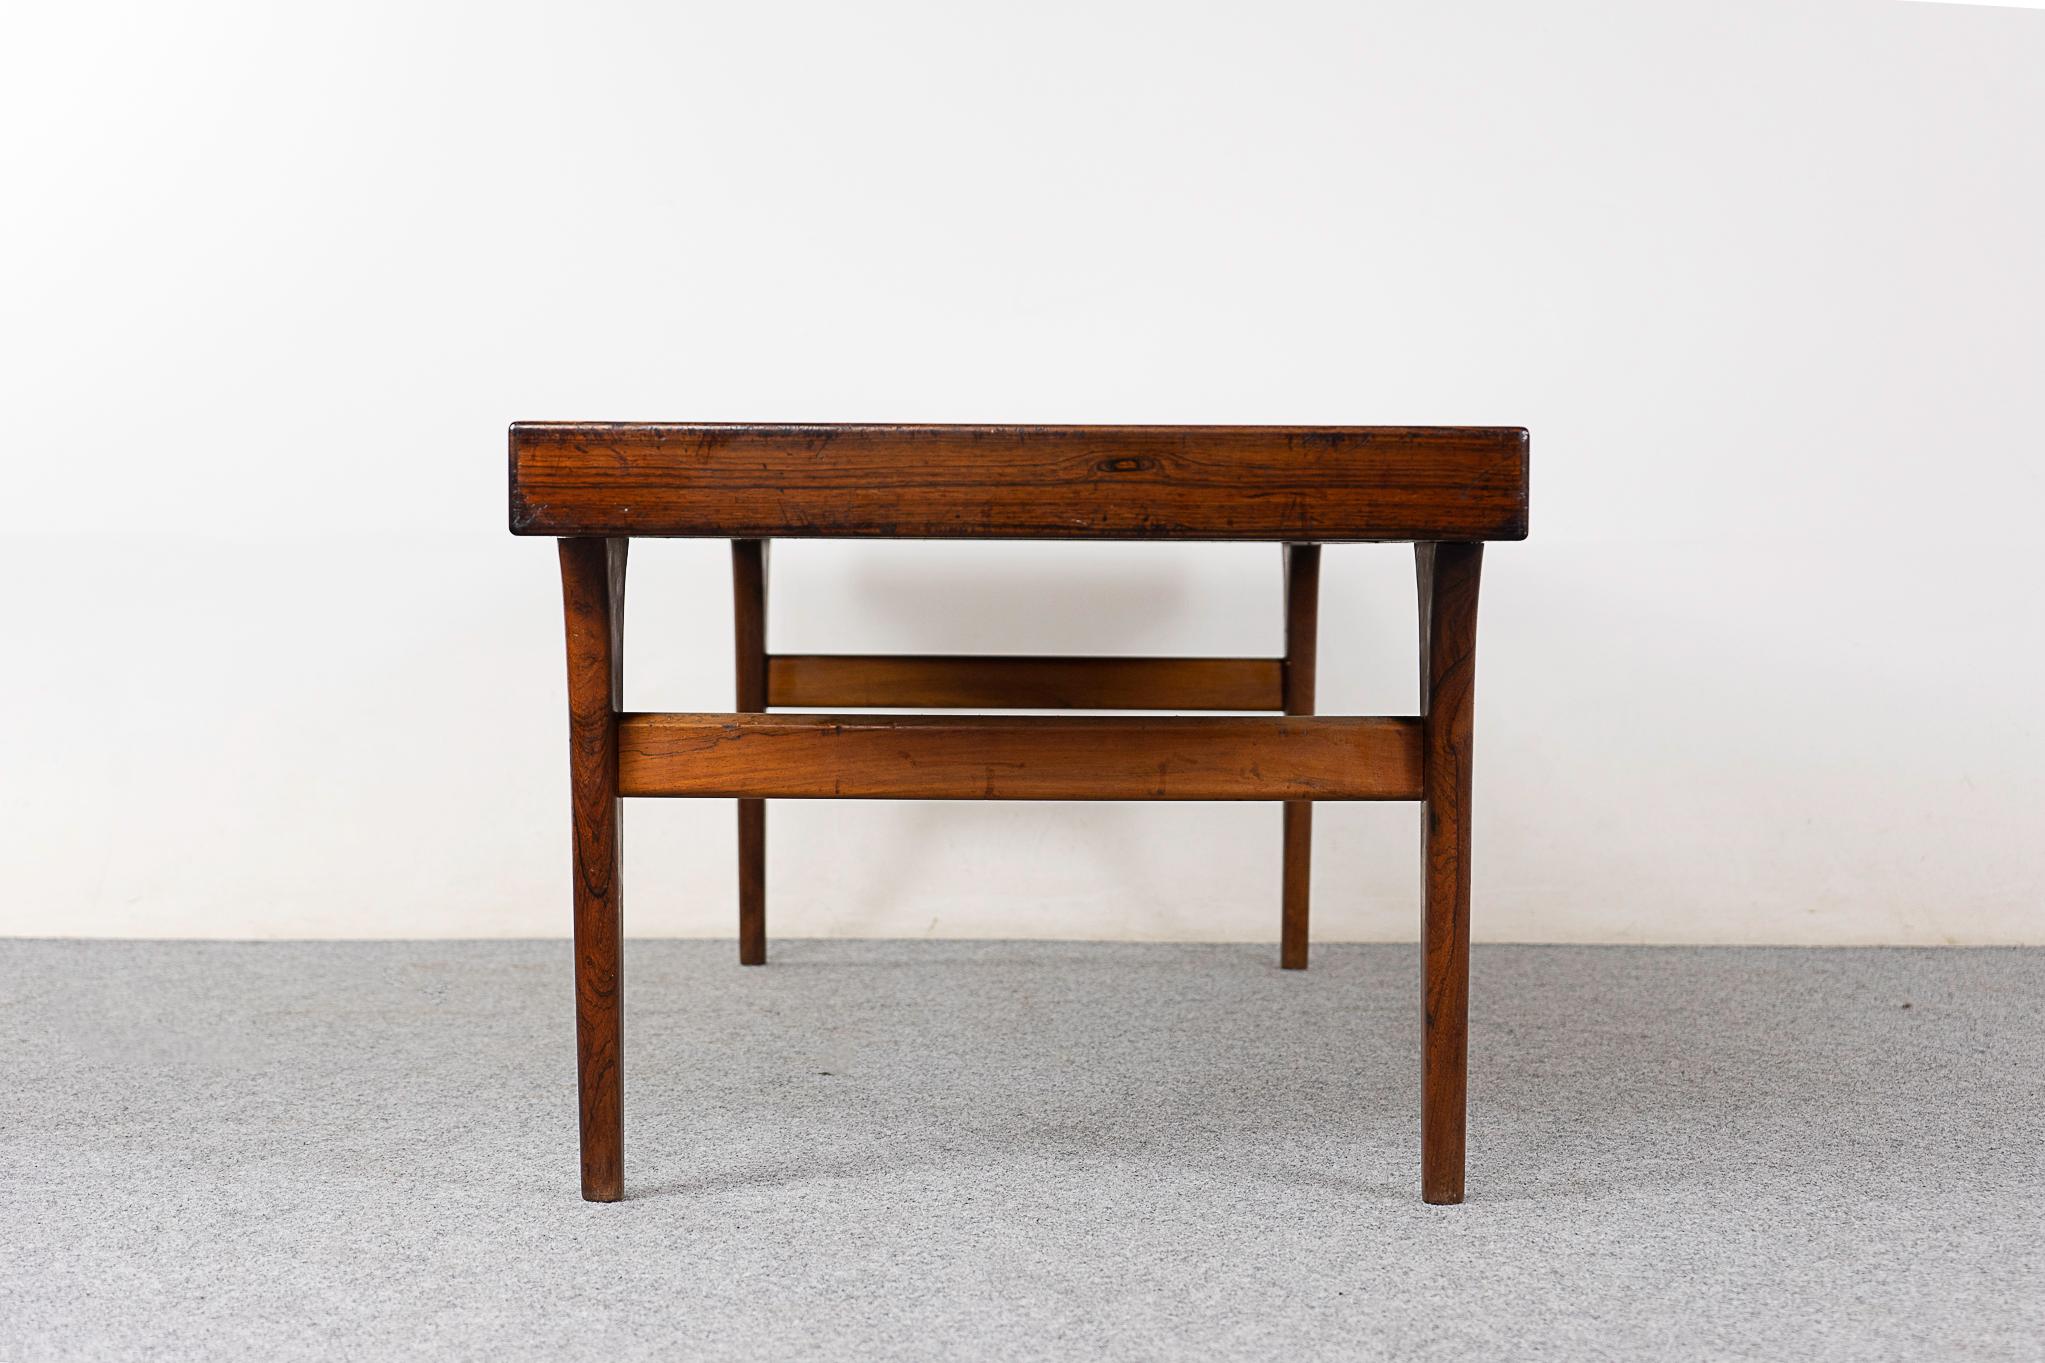 Danish Mid-Century Modern Rosewood & Tile Coffee Table by Johannes Andersen For Sale 2